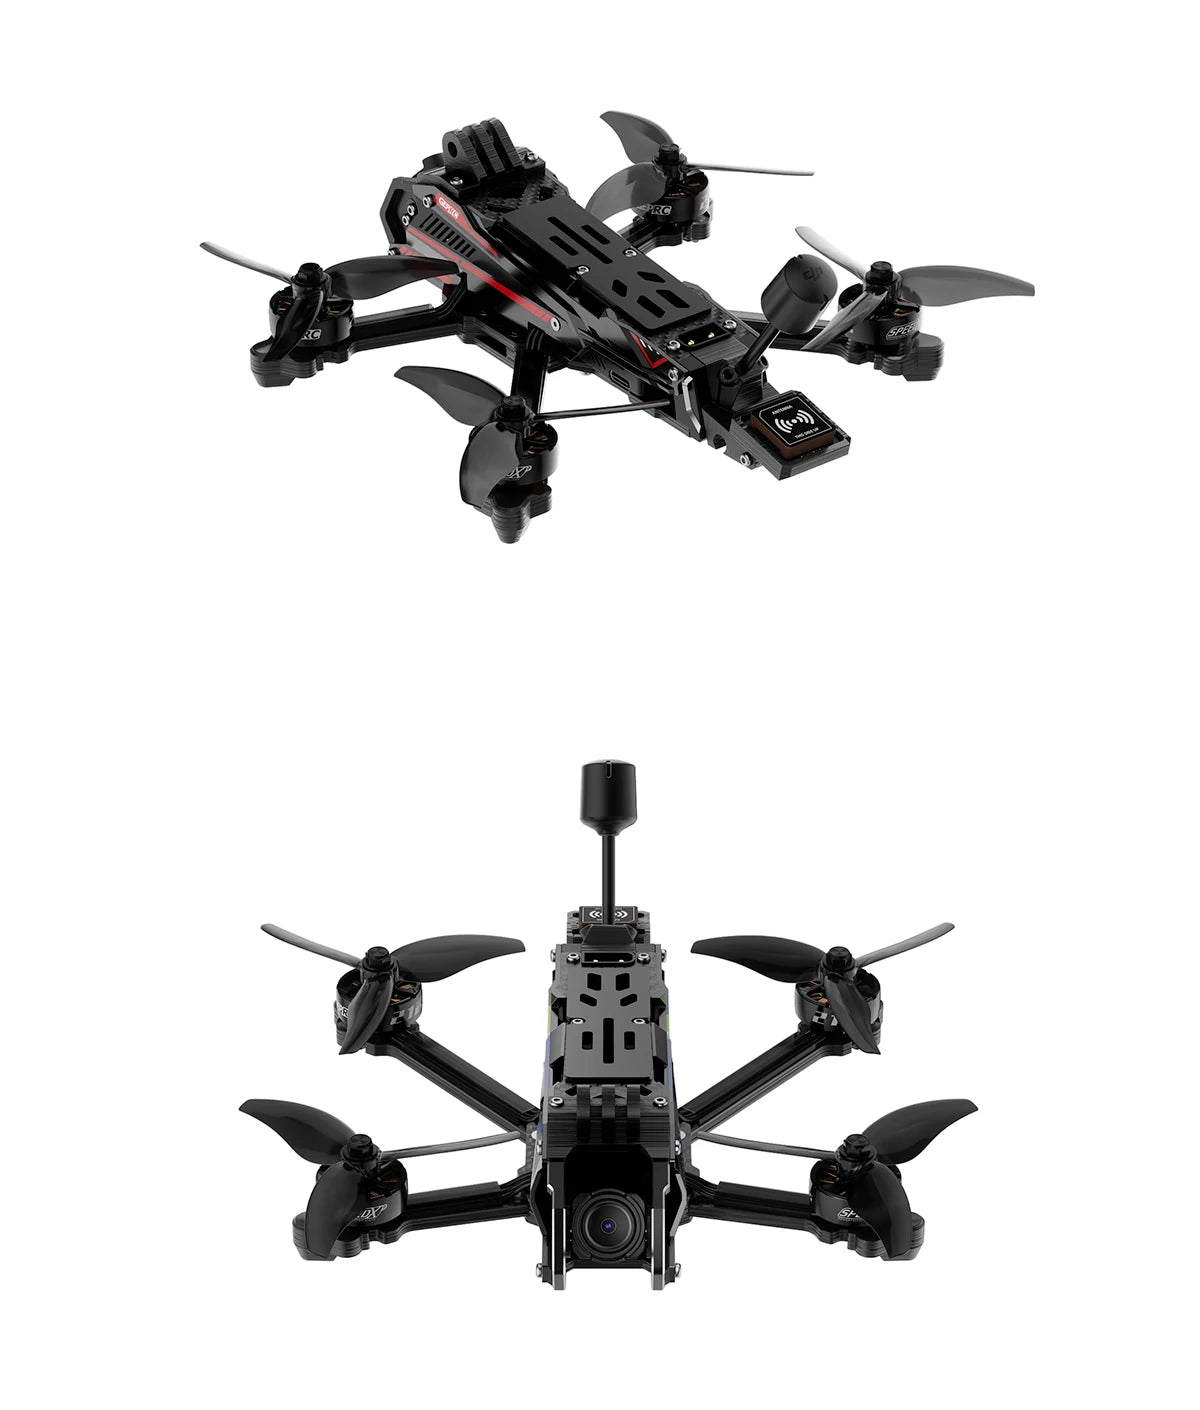 GEPRC DoMain3.6 HD O3 Freestyle FPV Drone, the customer must get warranty support directly from the 3rd party company Purchasing Matters 